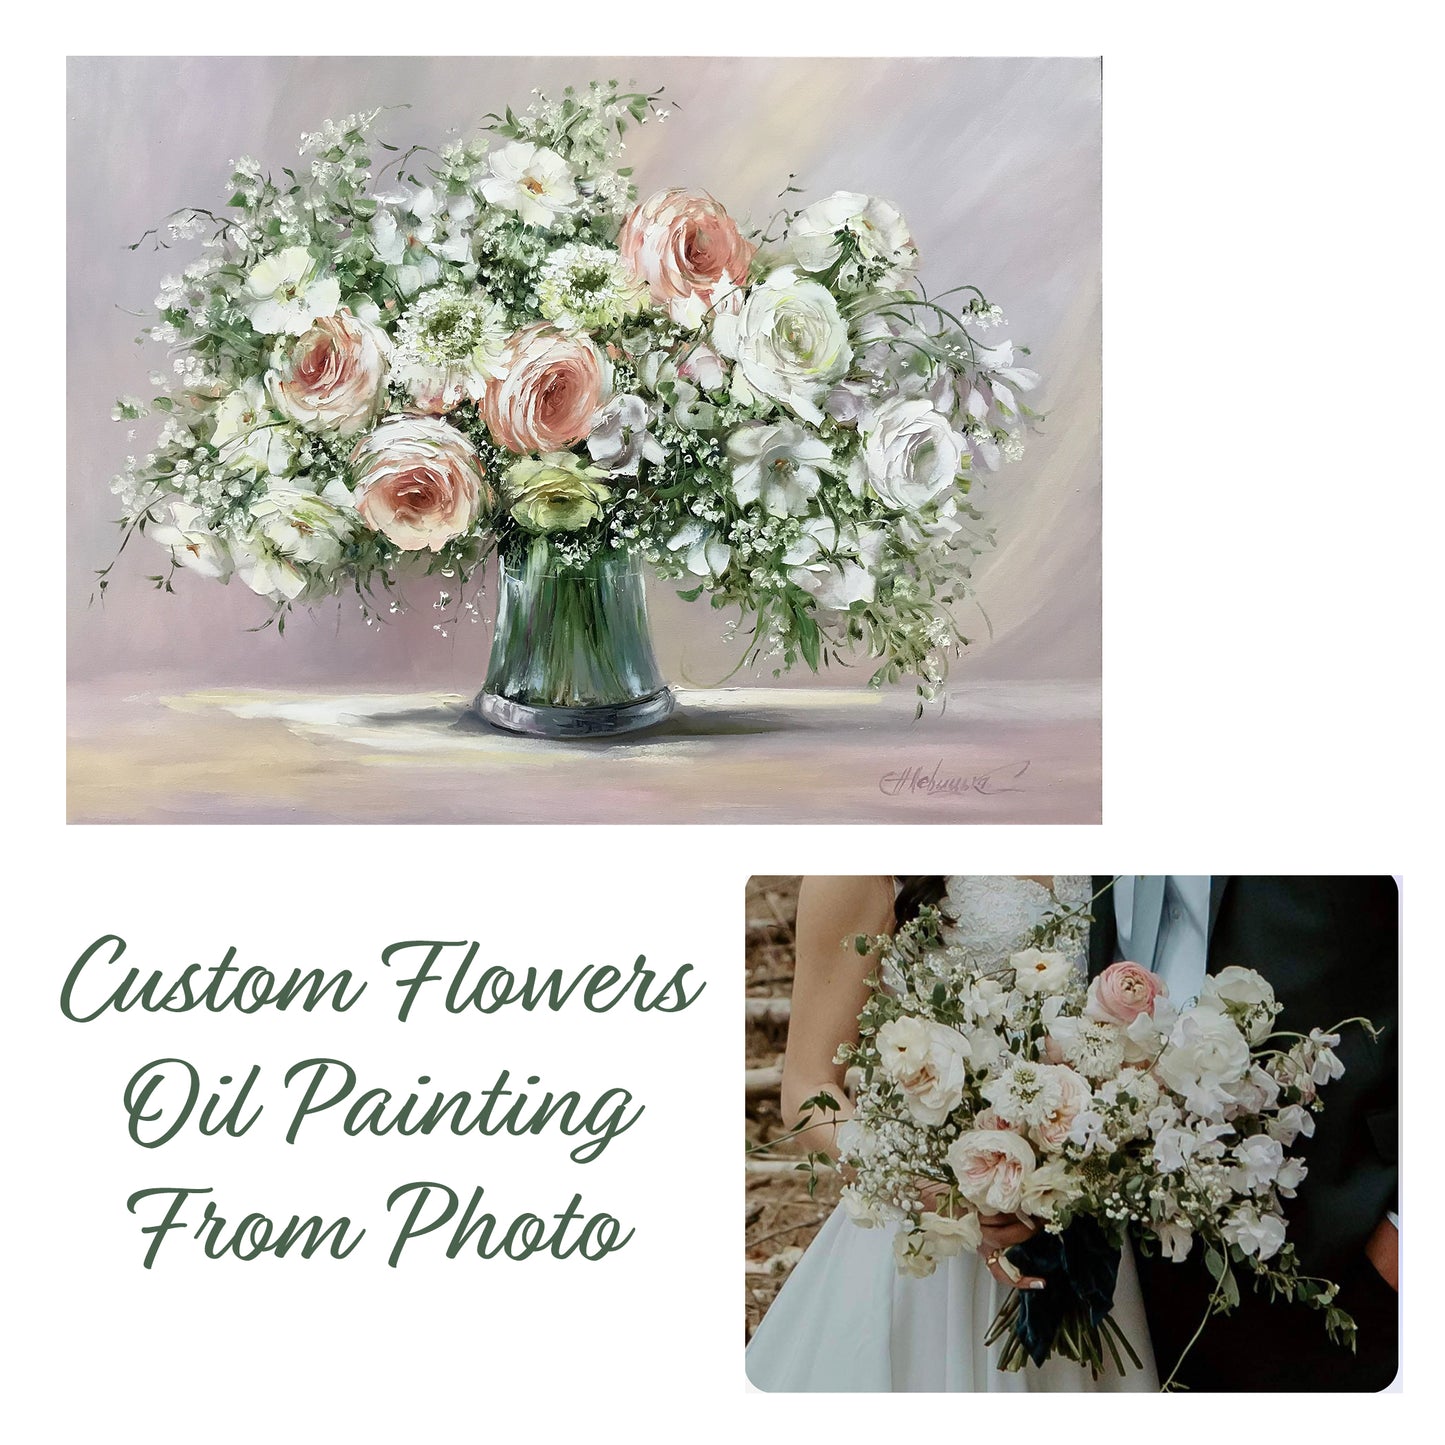 Custom Bridal Bouquet Painting from Photo, Still Life Oil Painting of Flowers in a Vase Original Art, Wedding Bouquet Flower Painting on Canvas